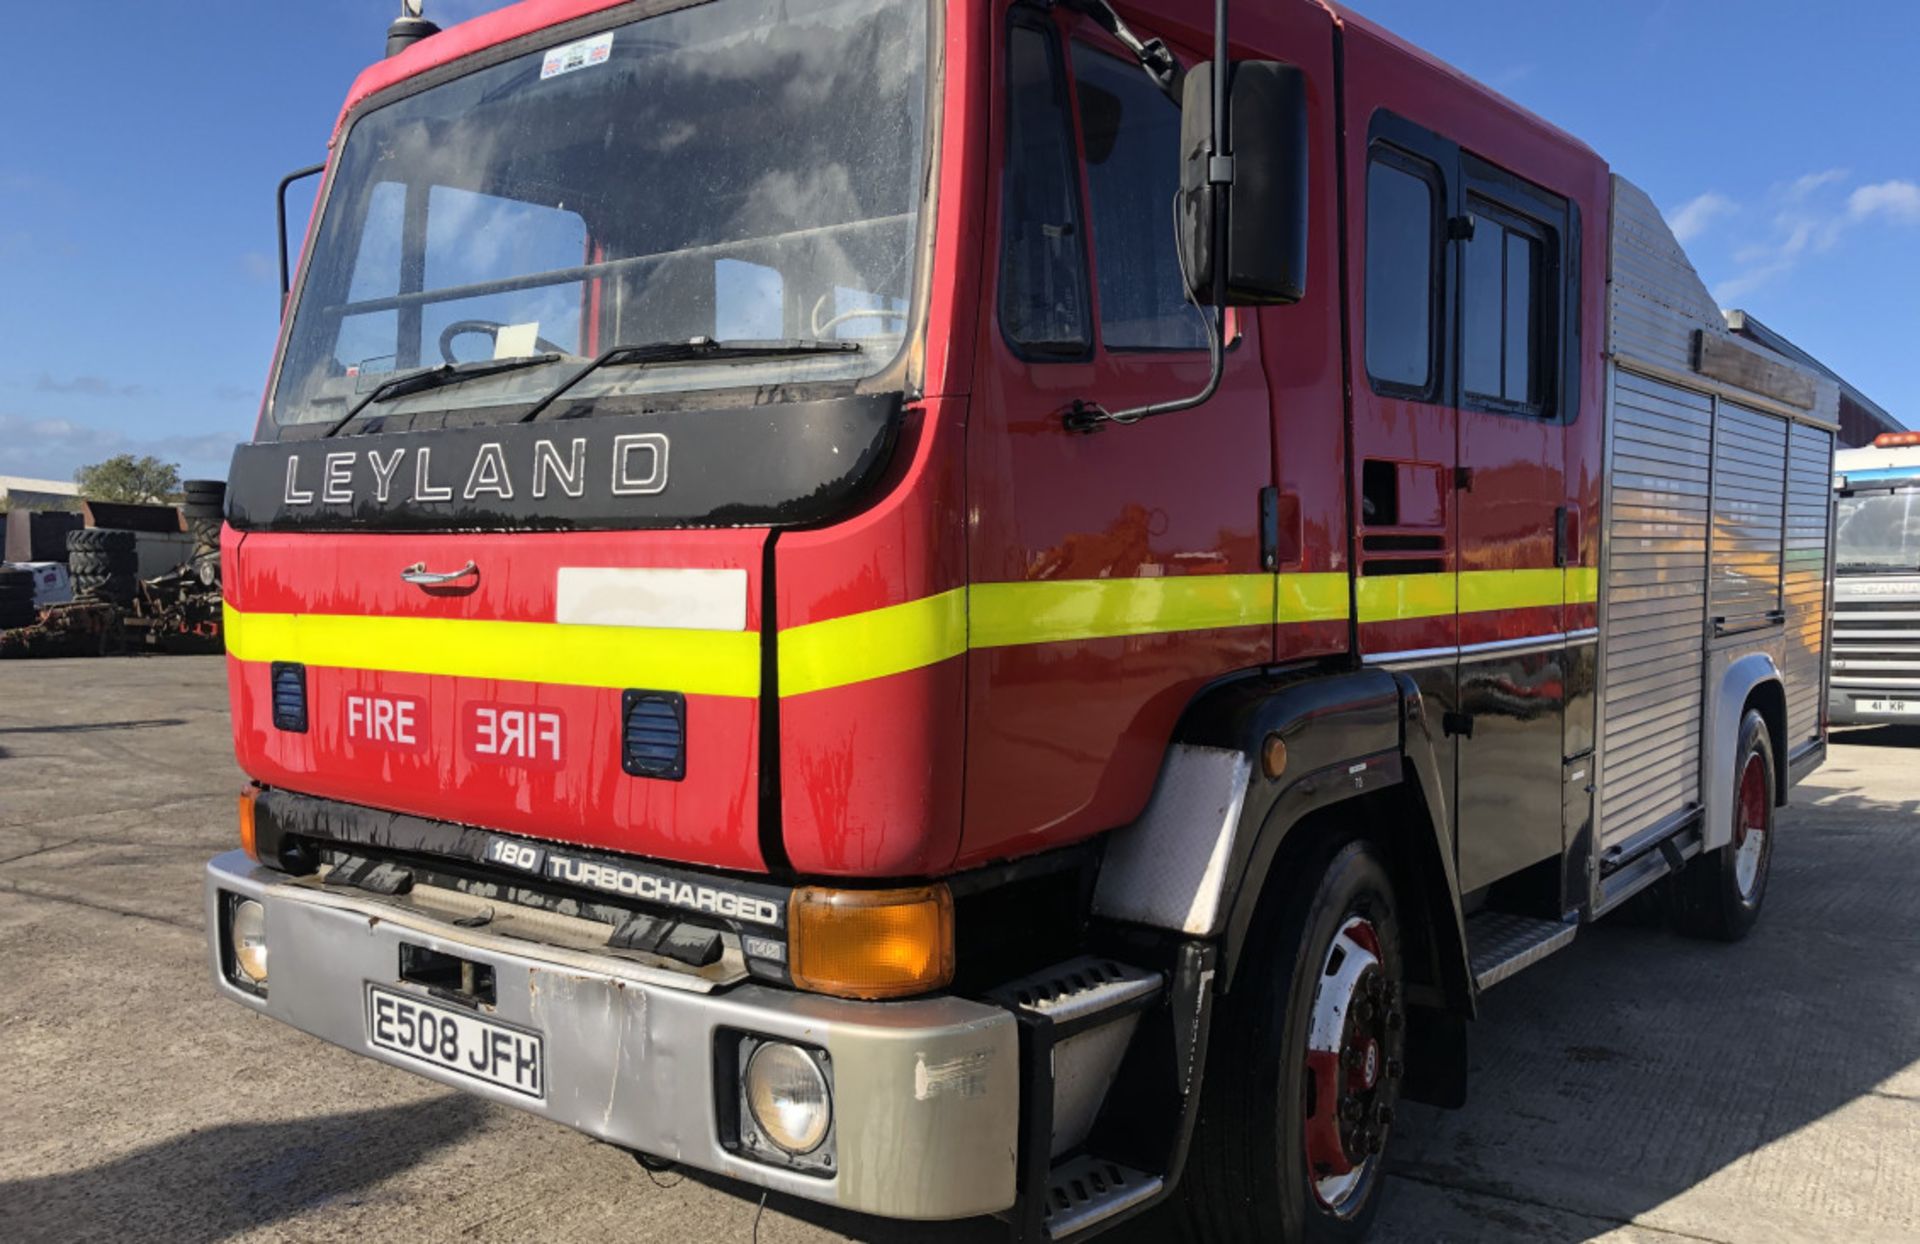 LEYLAND FRIEGHTER 1718 FIRE TENDER TRUCK - Image 3 of 11